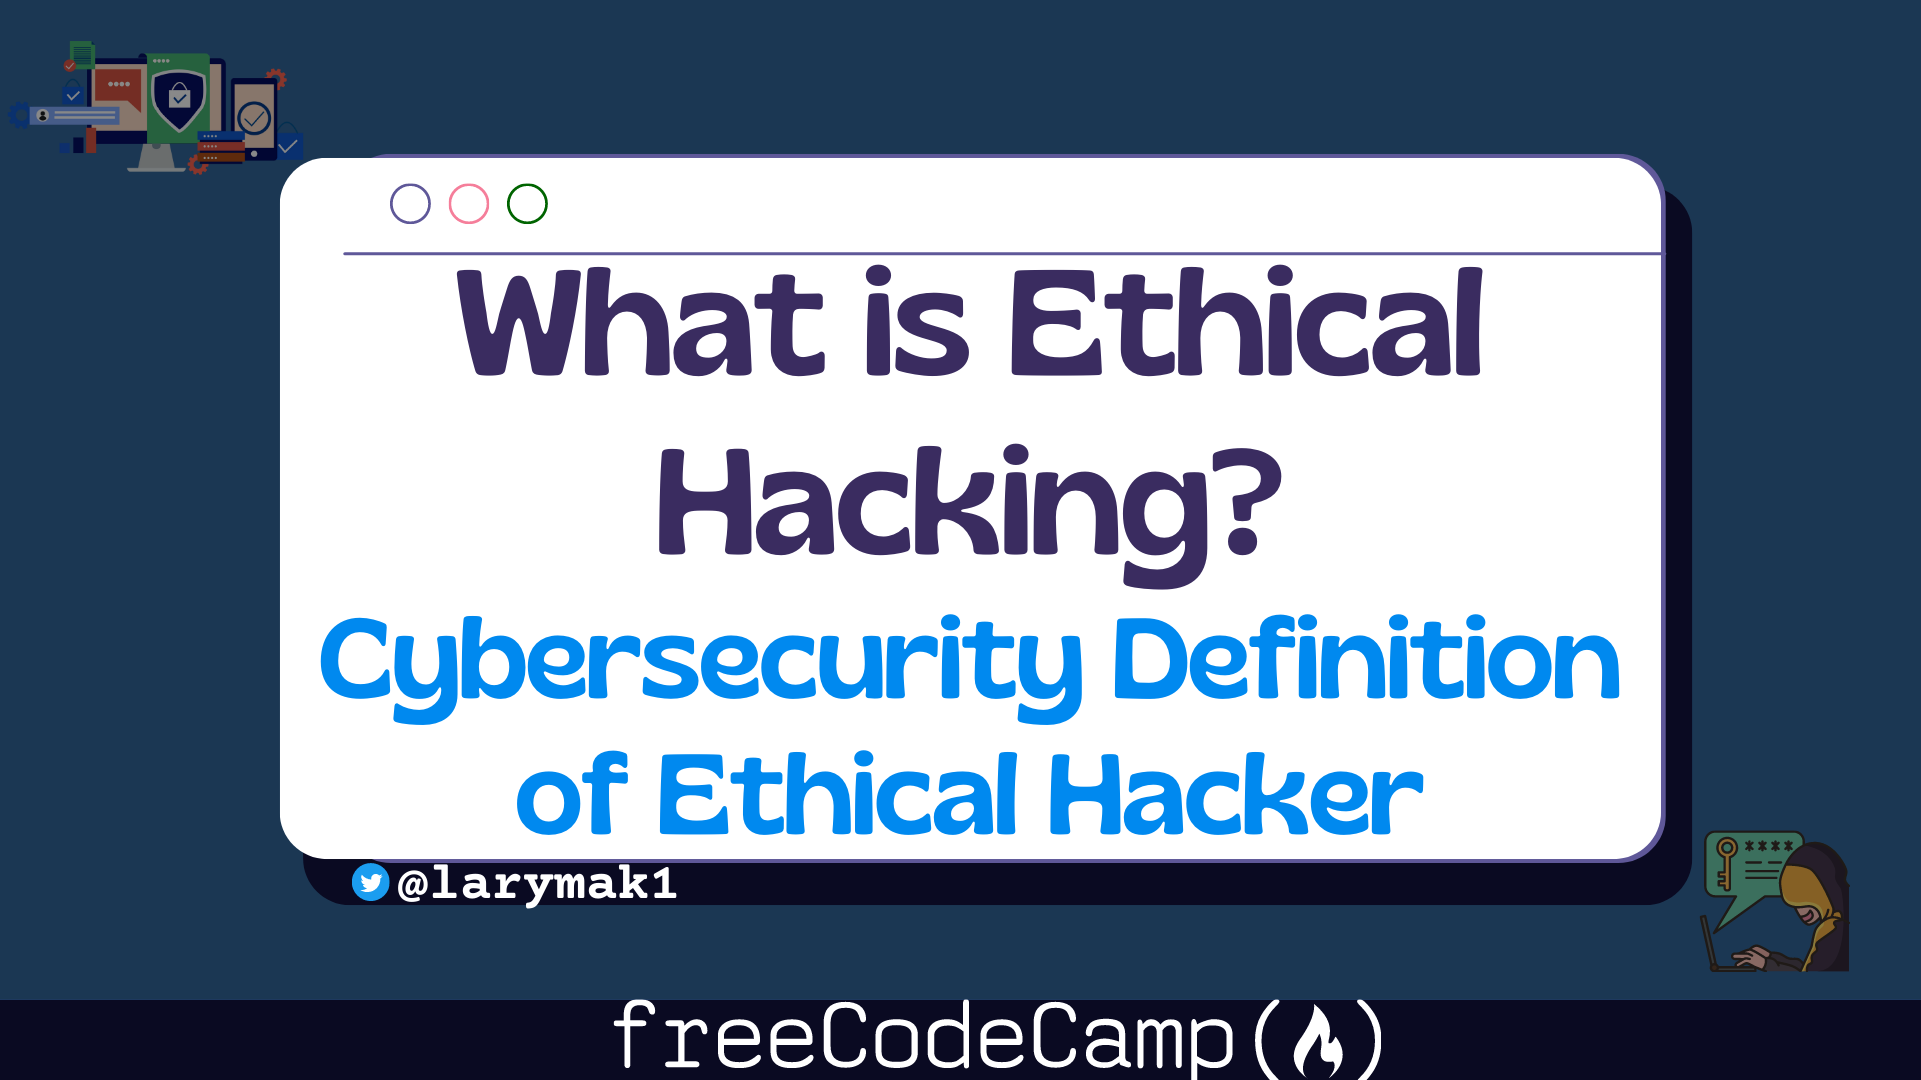 What is ethical hacking, and how does it work?